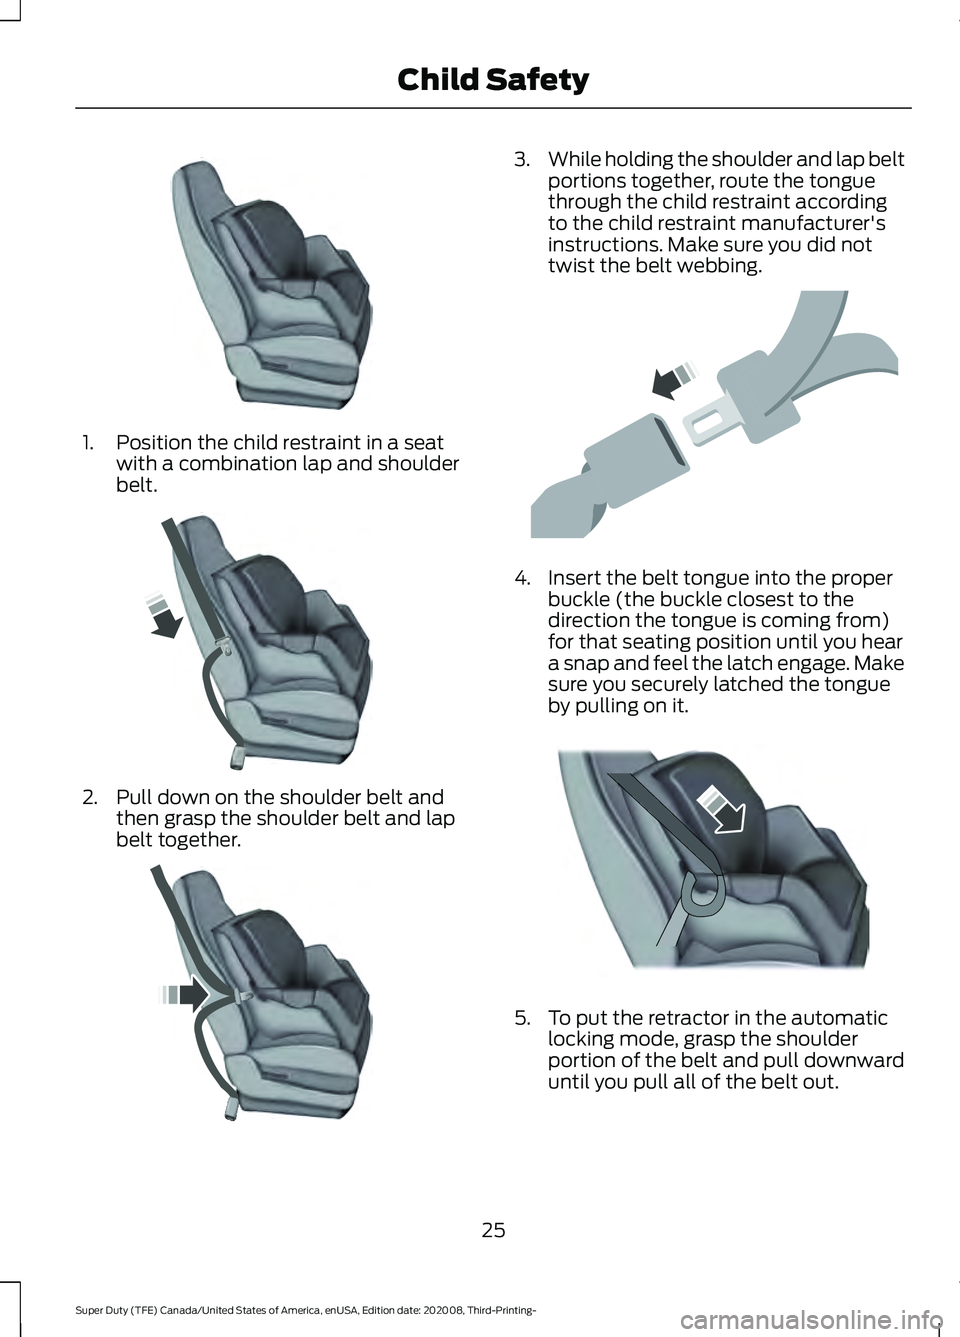 FORD F-250 2021  Owners Manual 1. Position the child restraint in a seat
with a combination lap and shoulder
belt. 2. Pull down on the shoulder belt and
then grasp the shoulder belt and lap
belt together. 3.
While holding the shoul